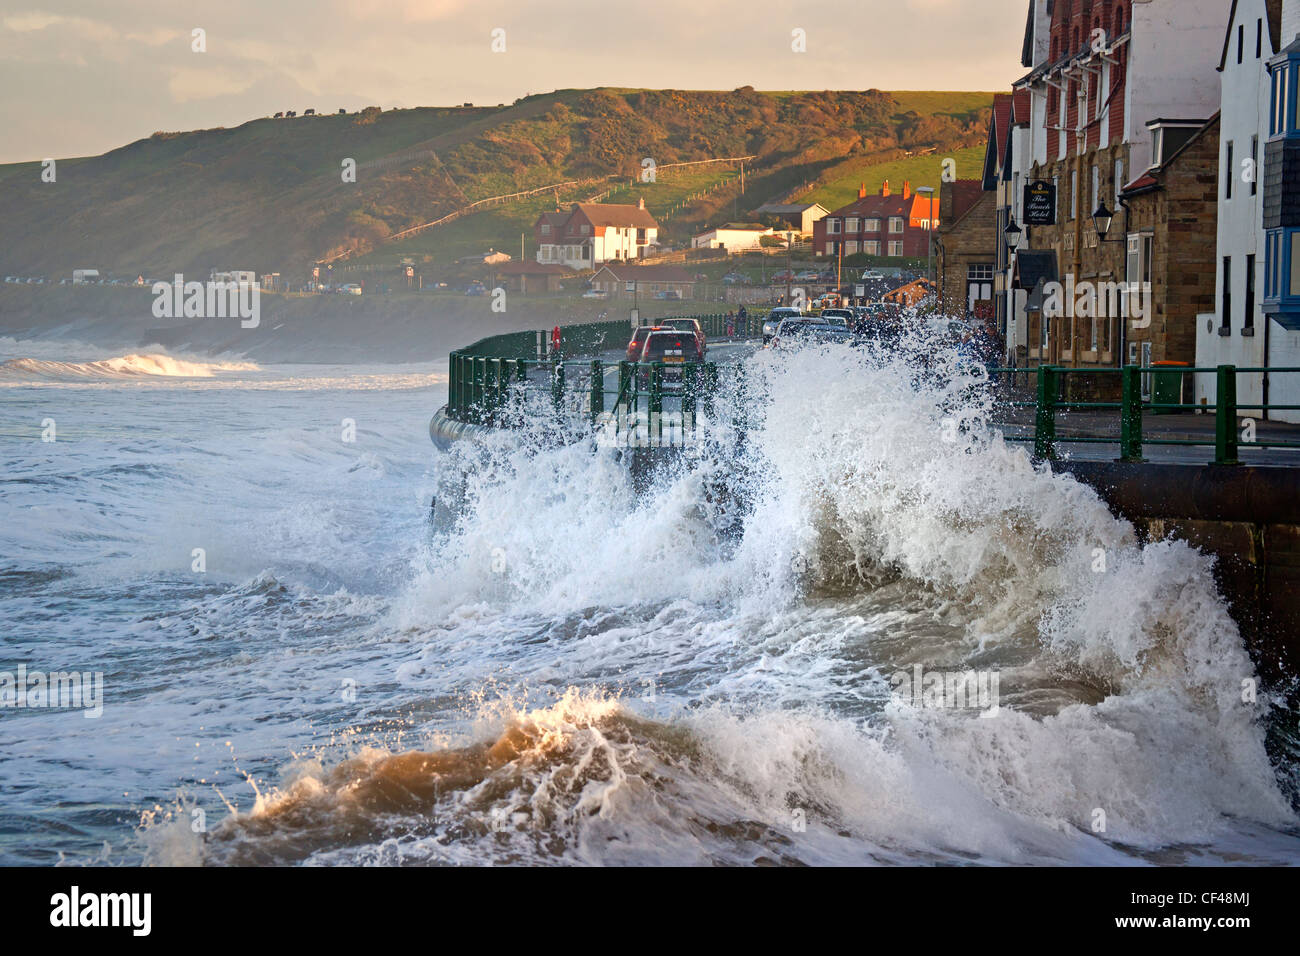 Large waves from the North Sea buffeting the seafront at Sandsend. Stock Photo